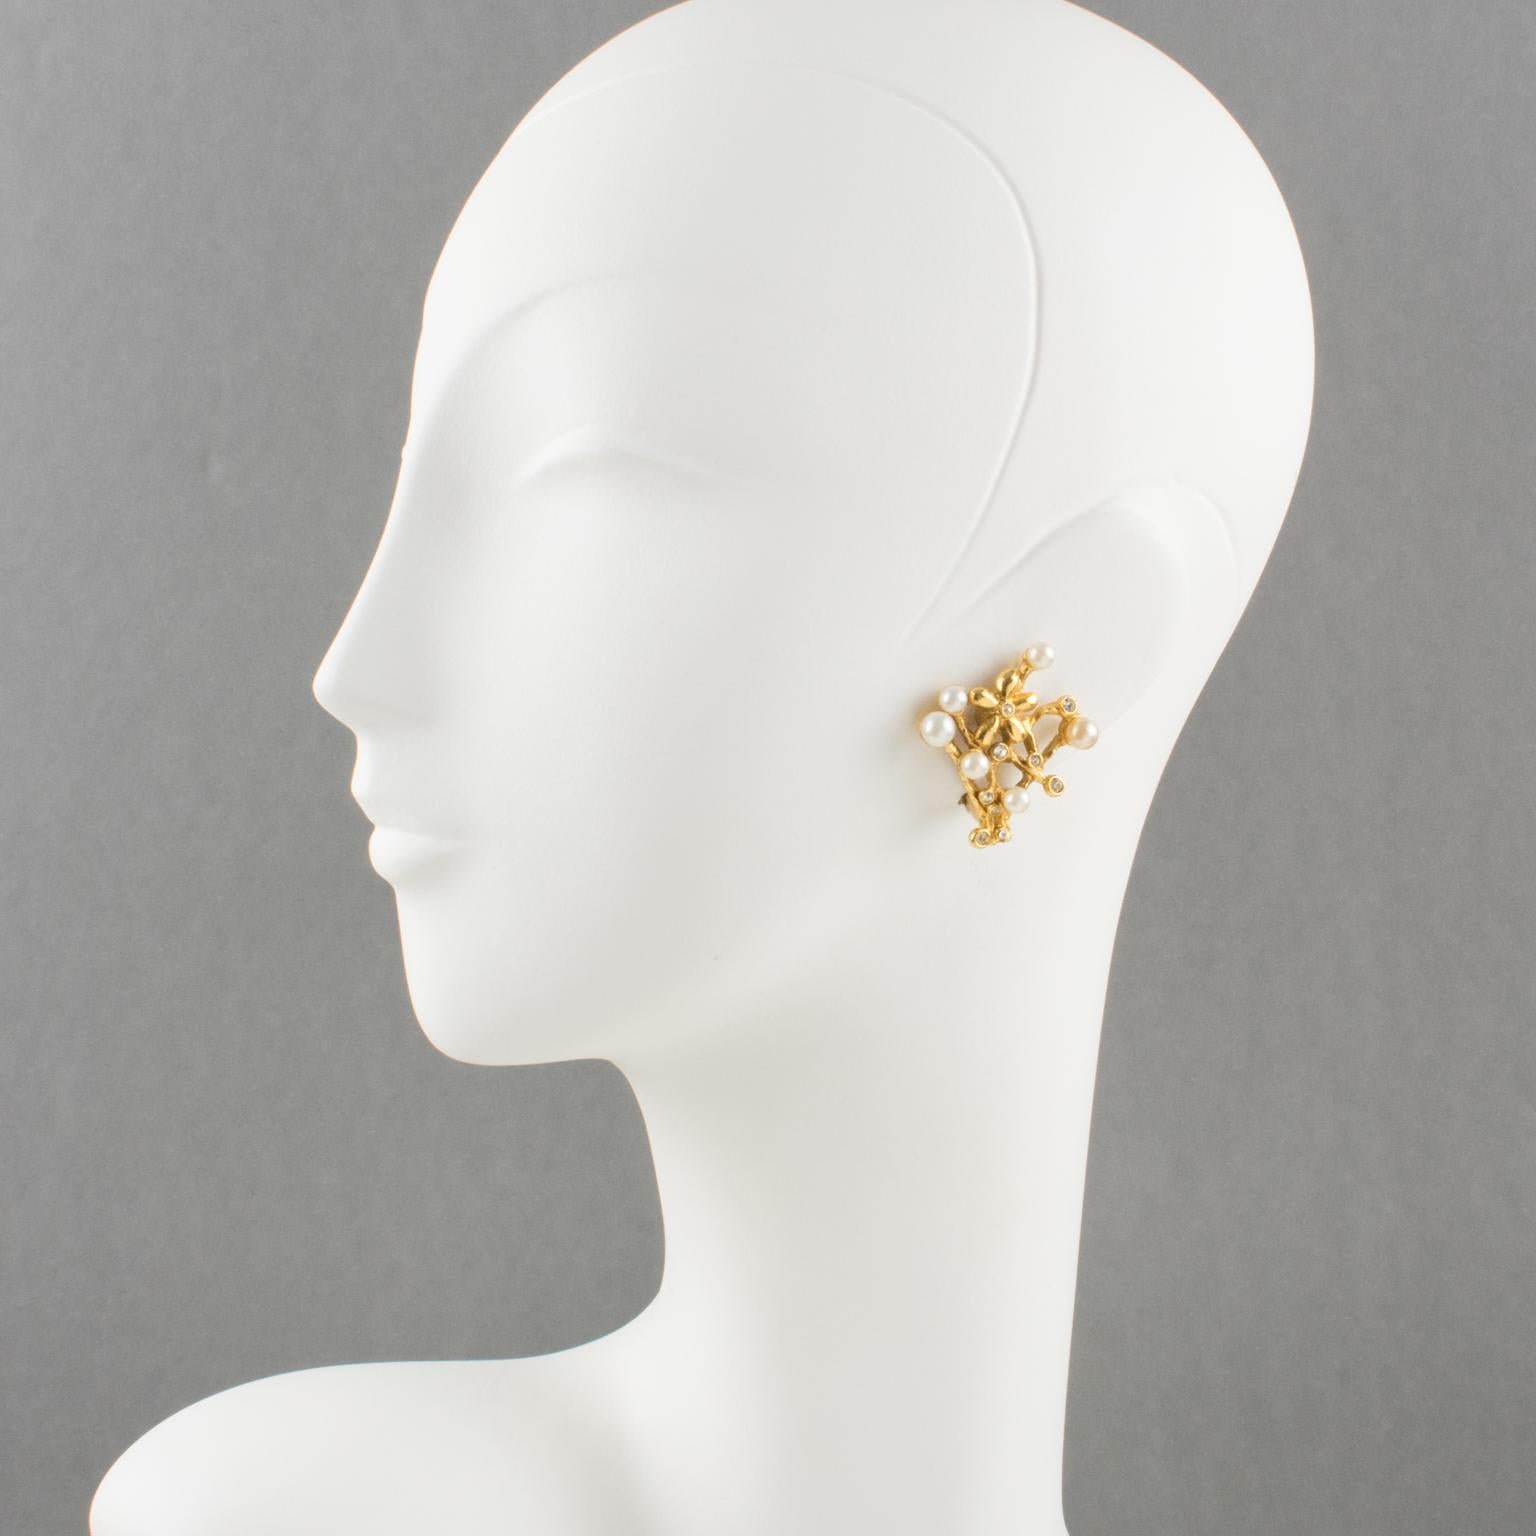 These romantic Kenzo Paris signed clip-on earrings feature a floral shape with gilt metal all carved and see-thru in branches and flowers. The earrings are embellished with pearls-imitation and tiny crystal rhinestones. Hand-marked on the side